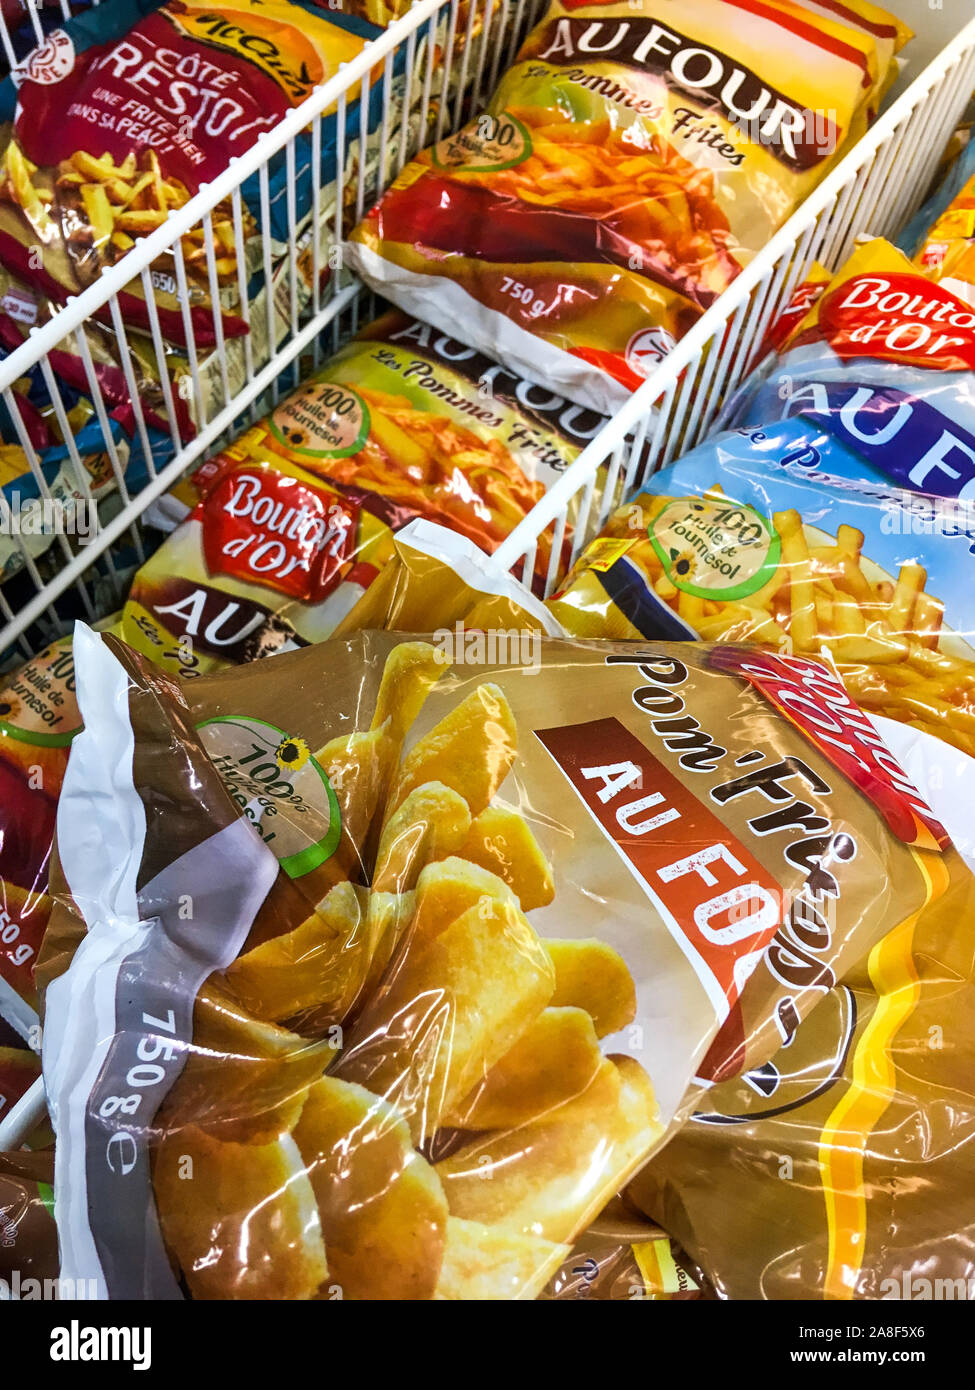 French fries under plastic package, Lyon, France Stock Photo - Alamy